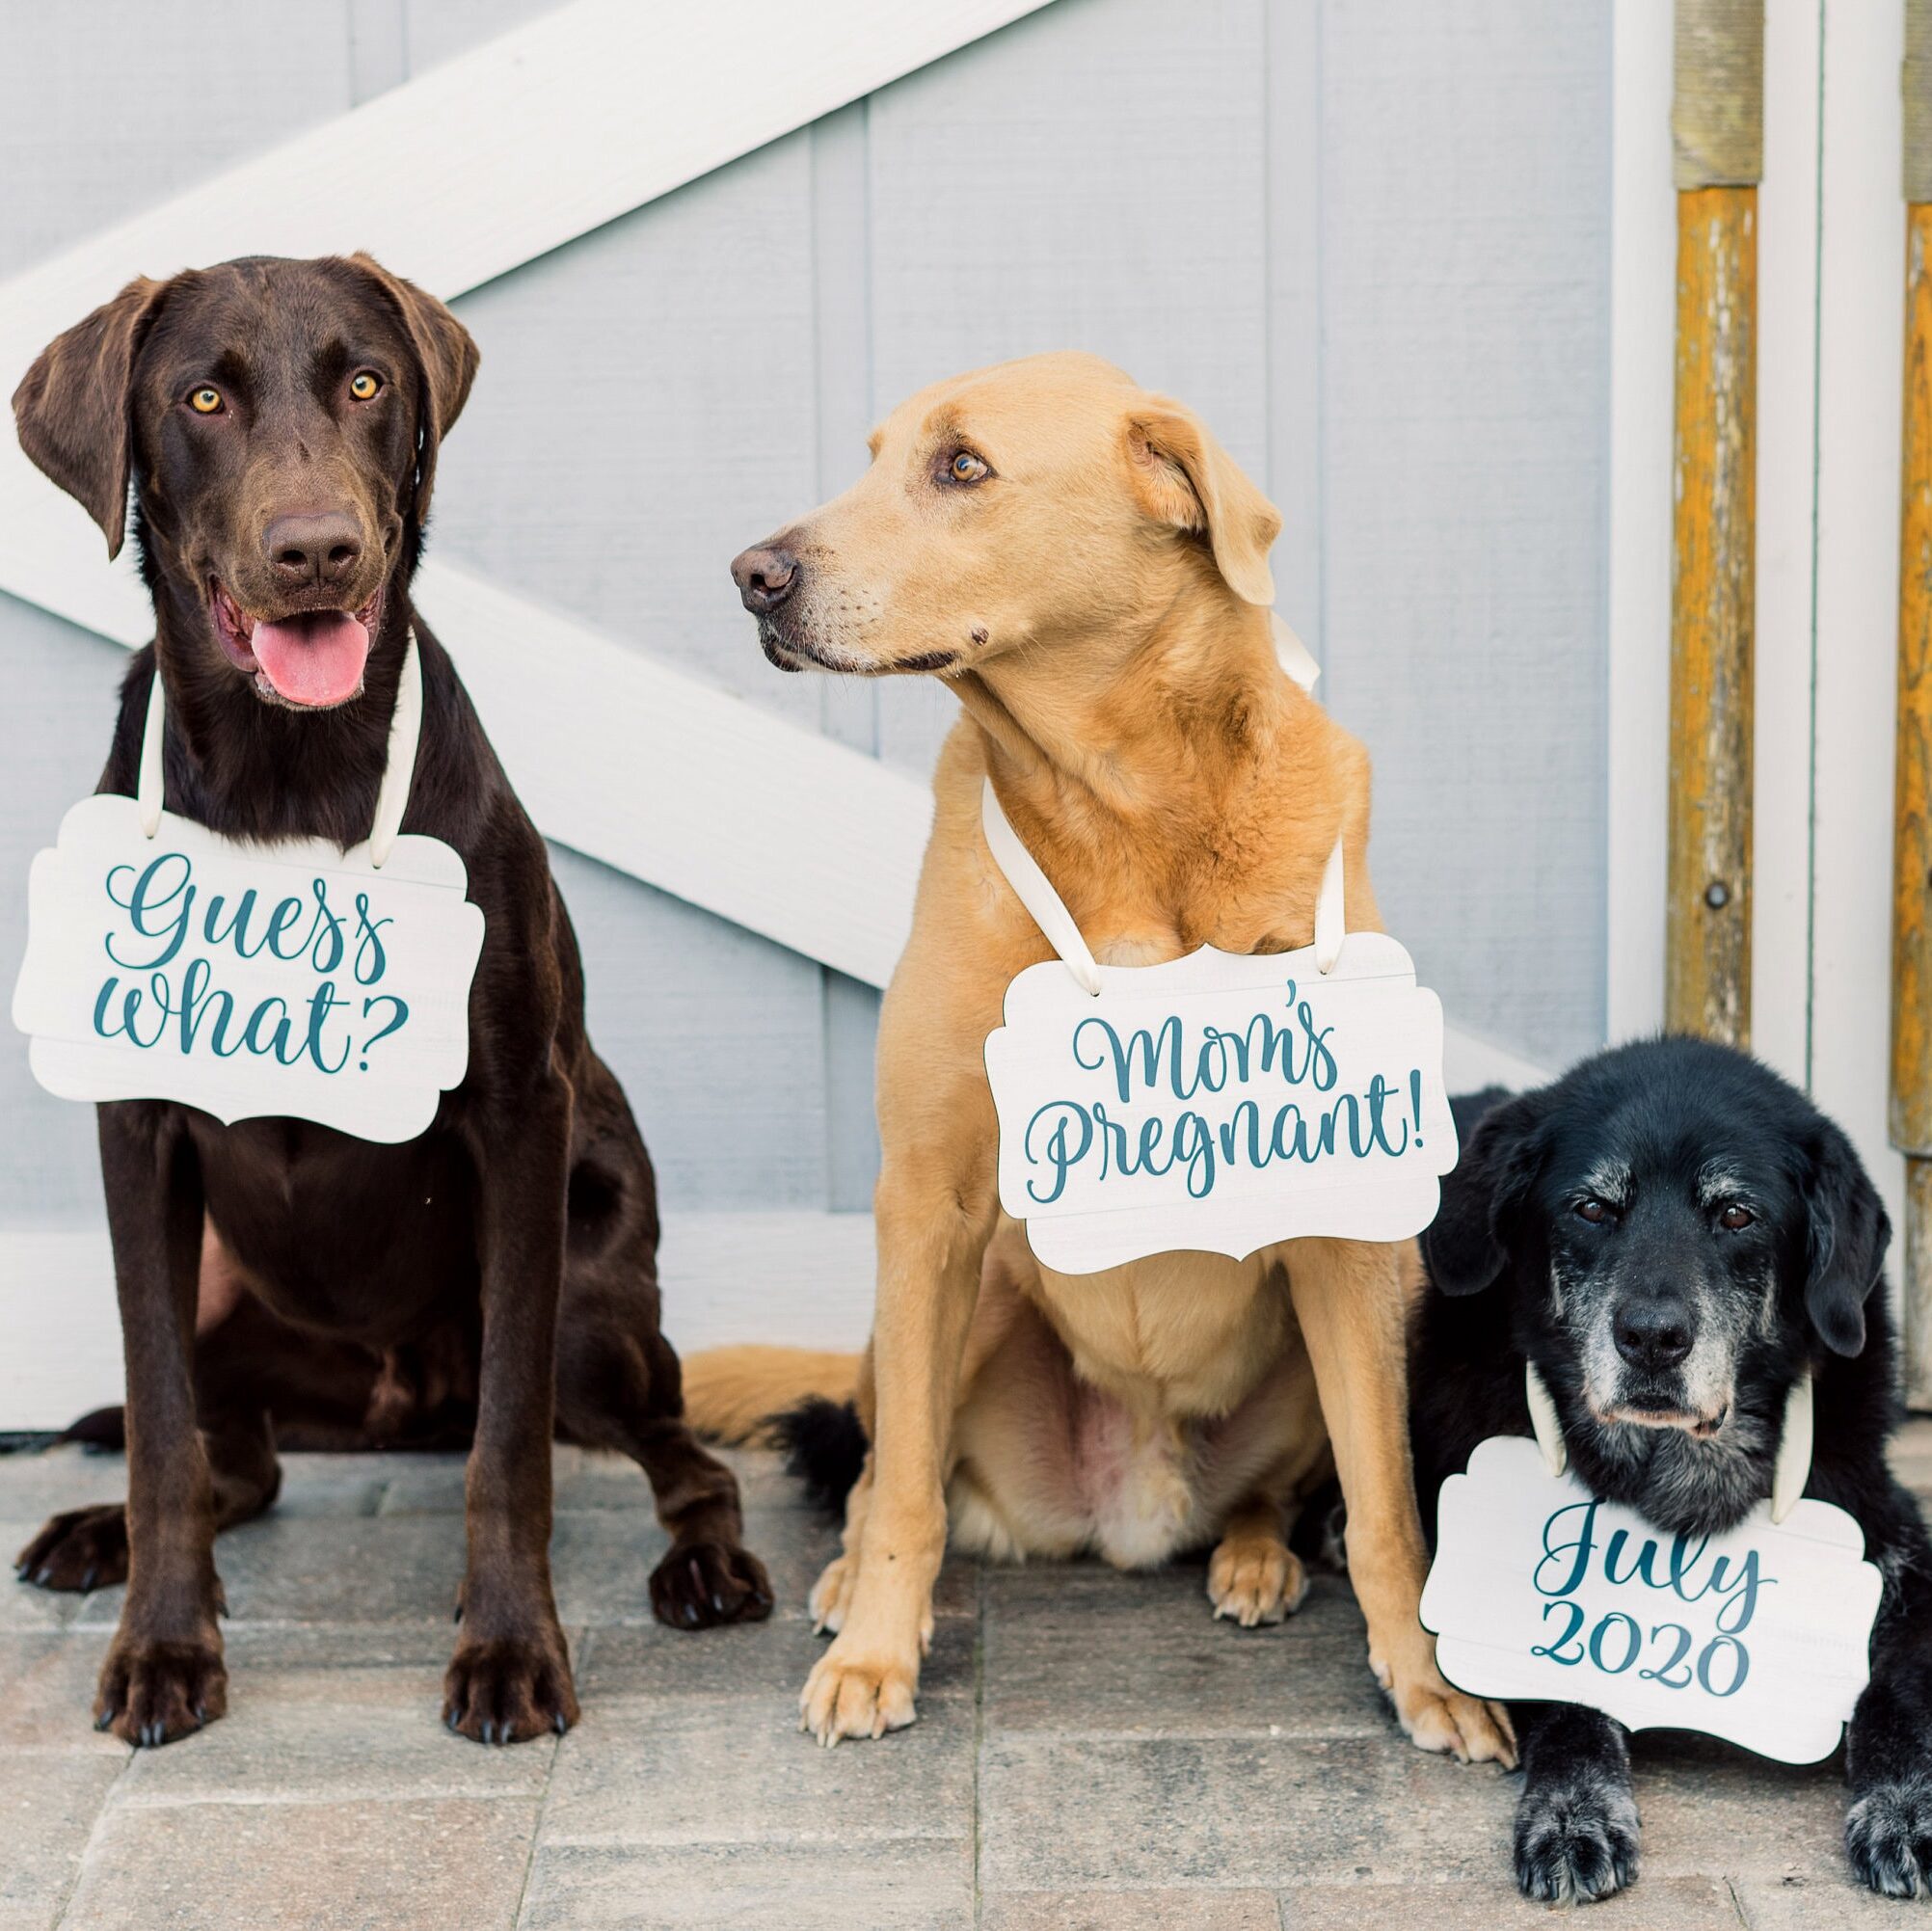 Pregnancy Announcement With Dogs